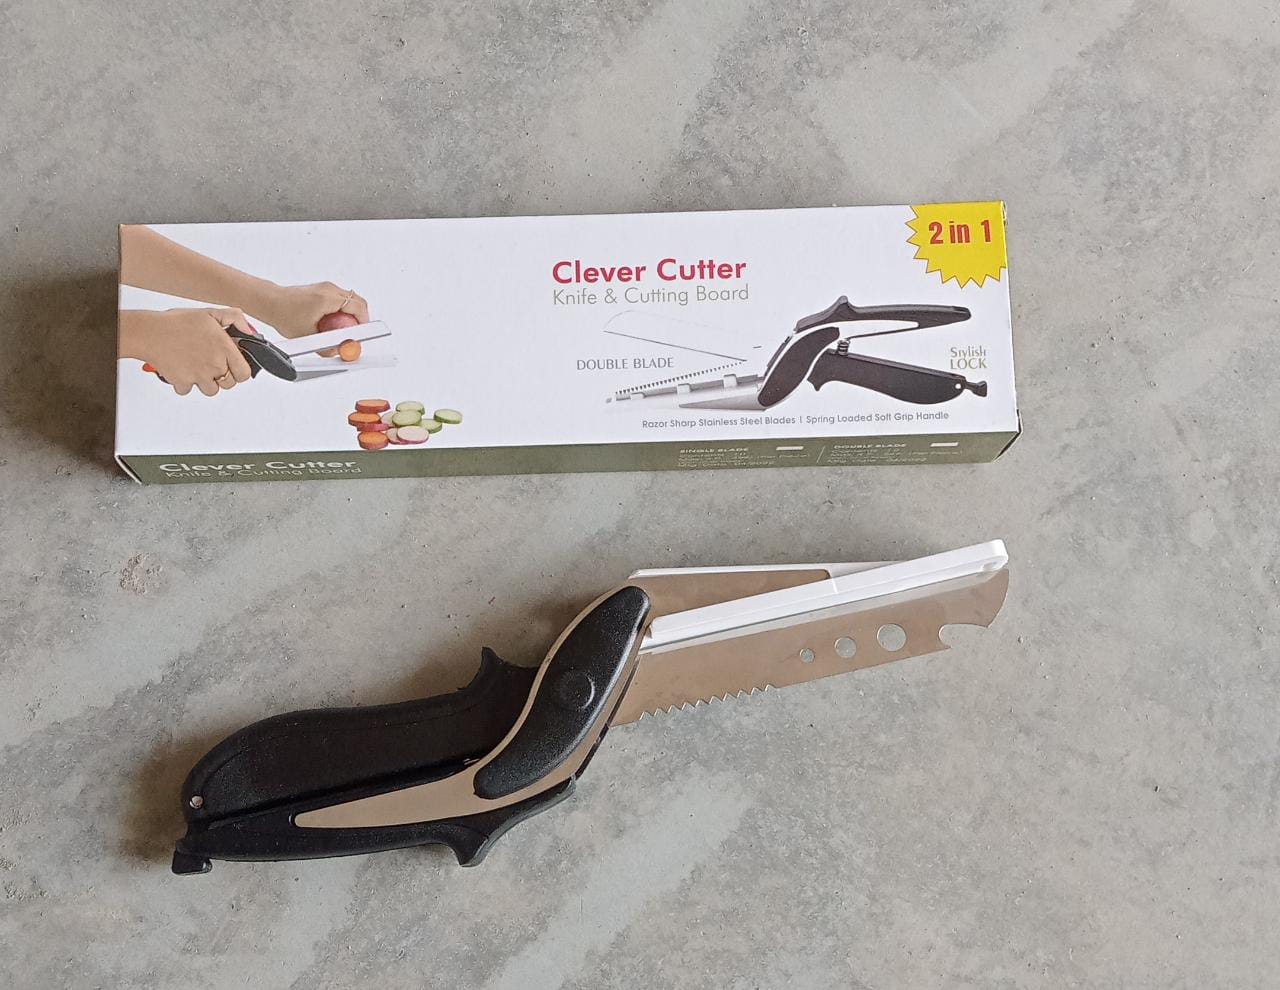 073 Stainless Steel 4 in 1 Clever Cutter, Black